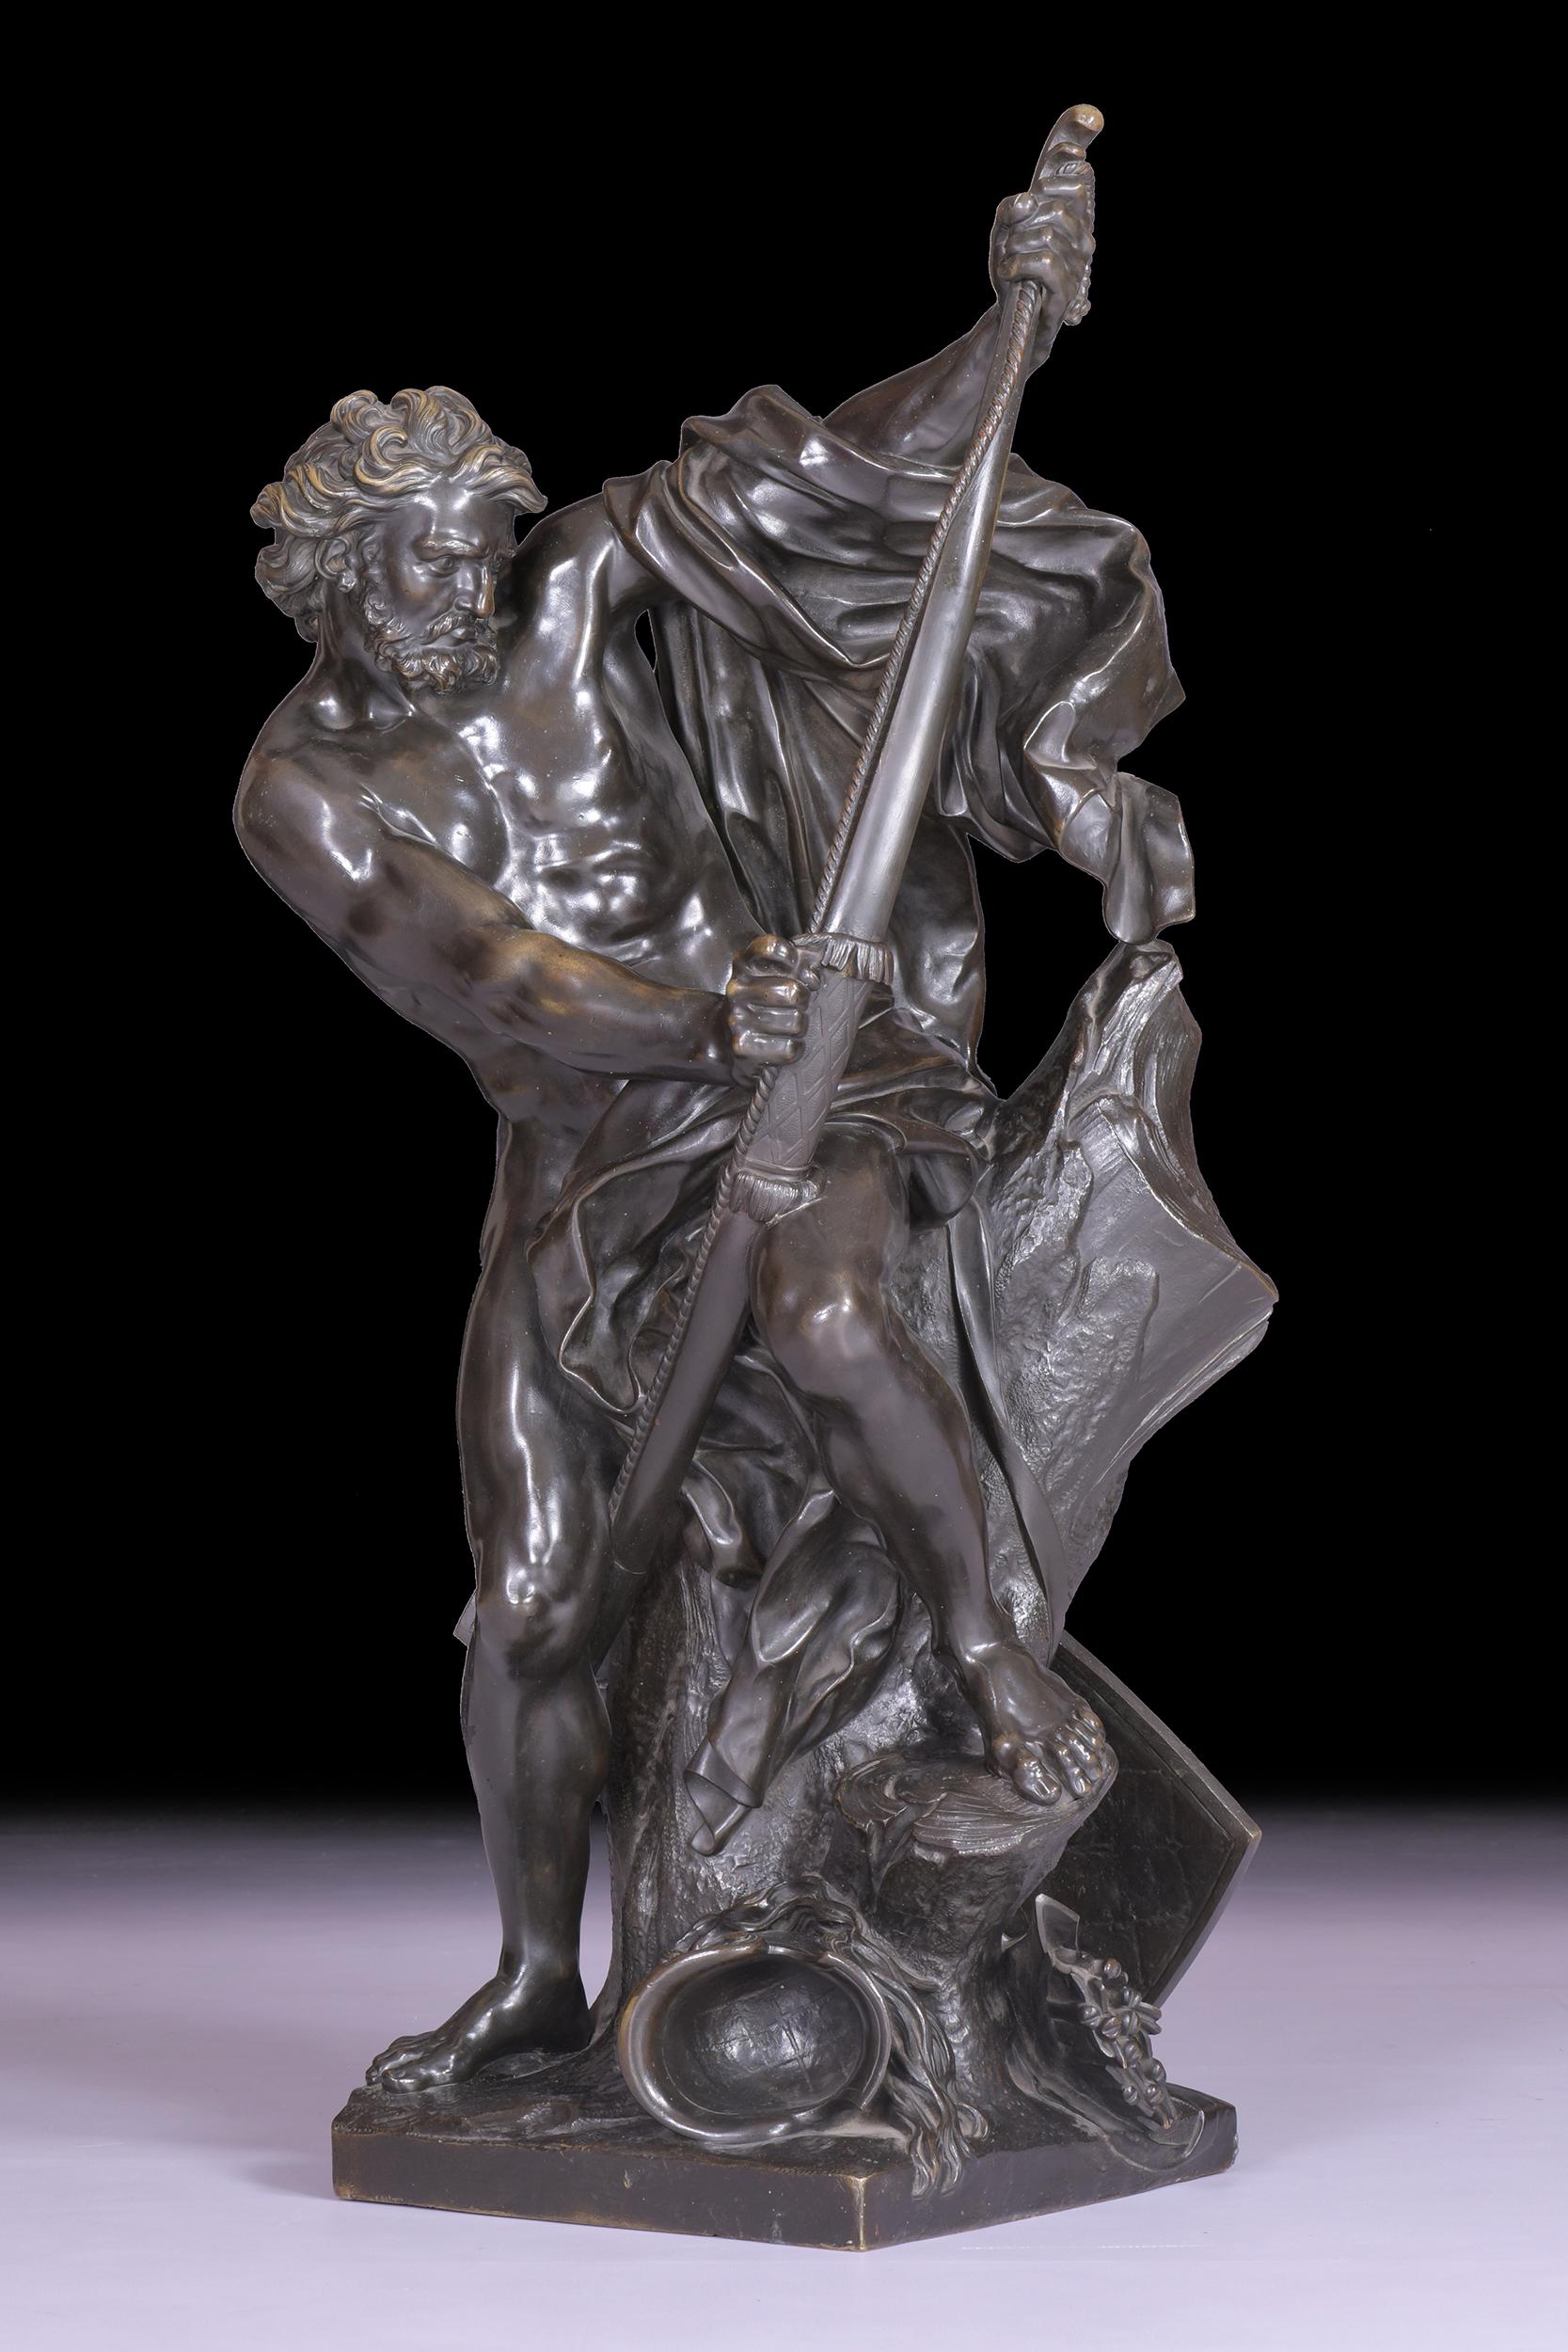 A magnificent 19th century bronze of Ulysses stringing his bow on square base. After Jacques Bousseau (1681-1740).

Circa 1830

French

Dimensions:

H: 35 in / 89 cm
W: 11 in / 28 cm
D: 11 in / 28 cm.